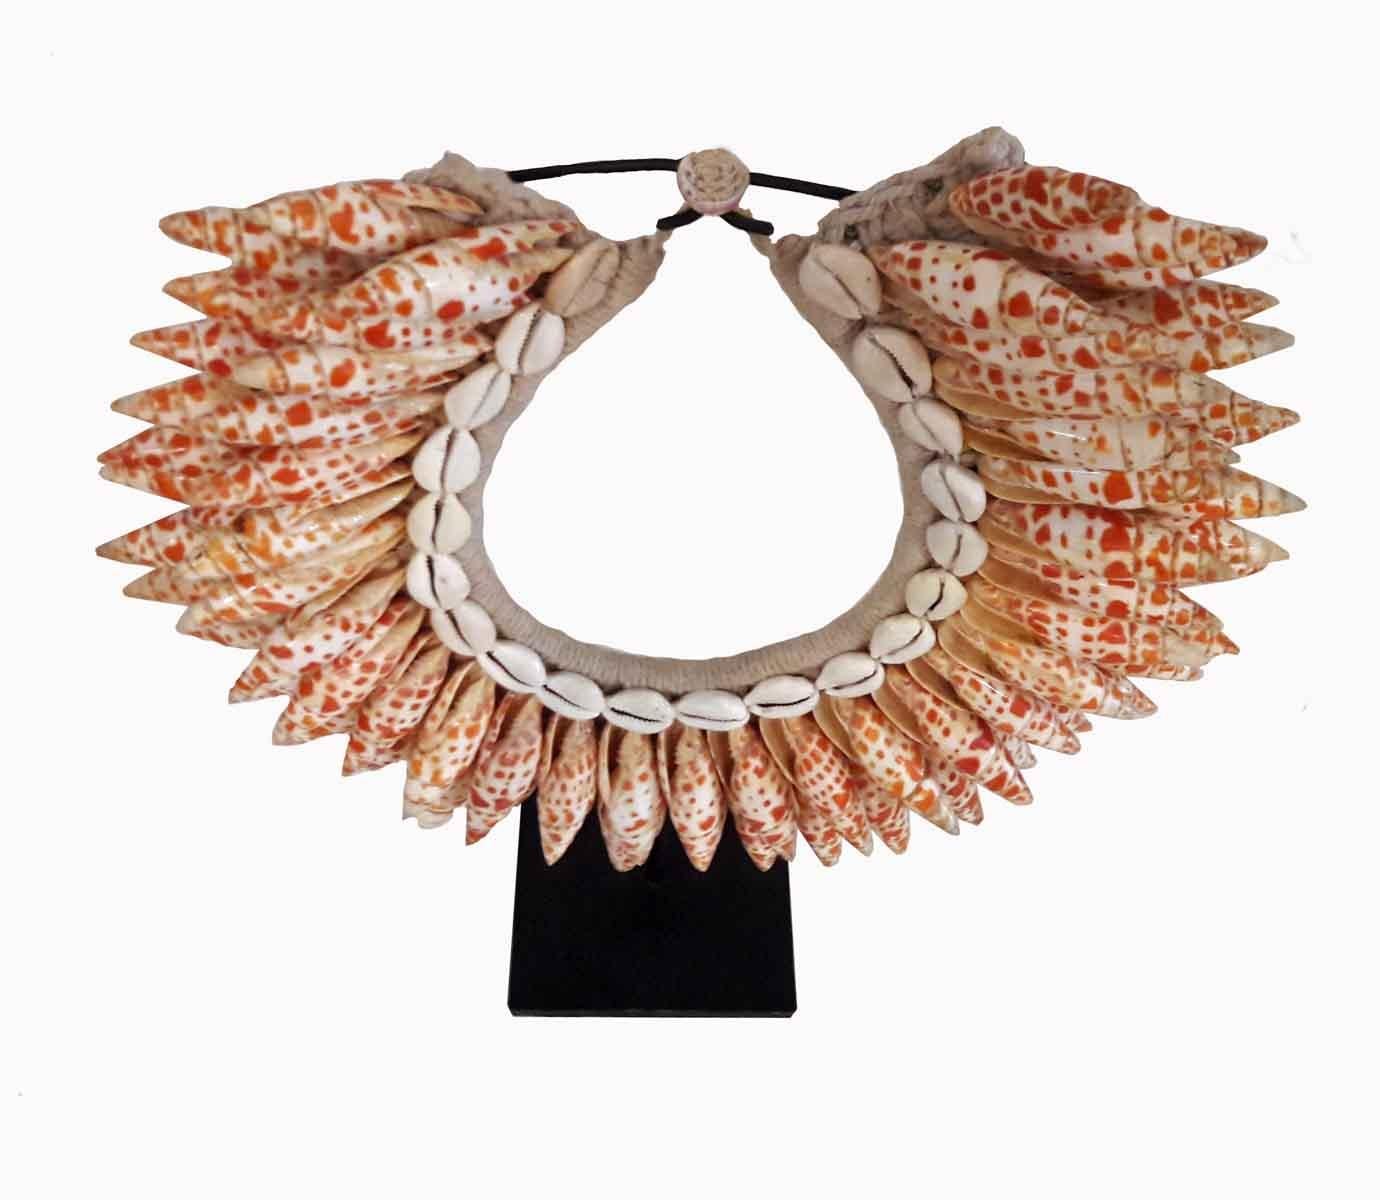 A handwoven seashell necklace from Bali, Indonesia. Small tiger conch and money cowry artfully arranged on a woven cotton base, mounted on a 4.5